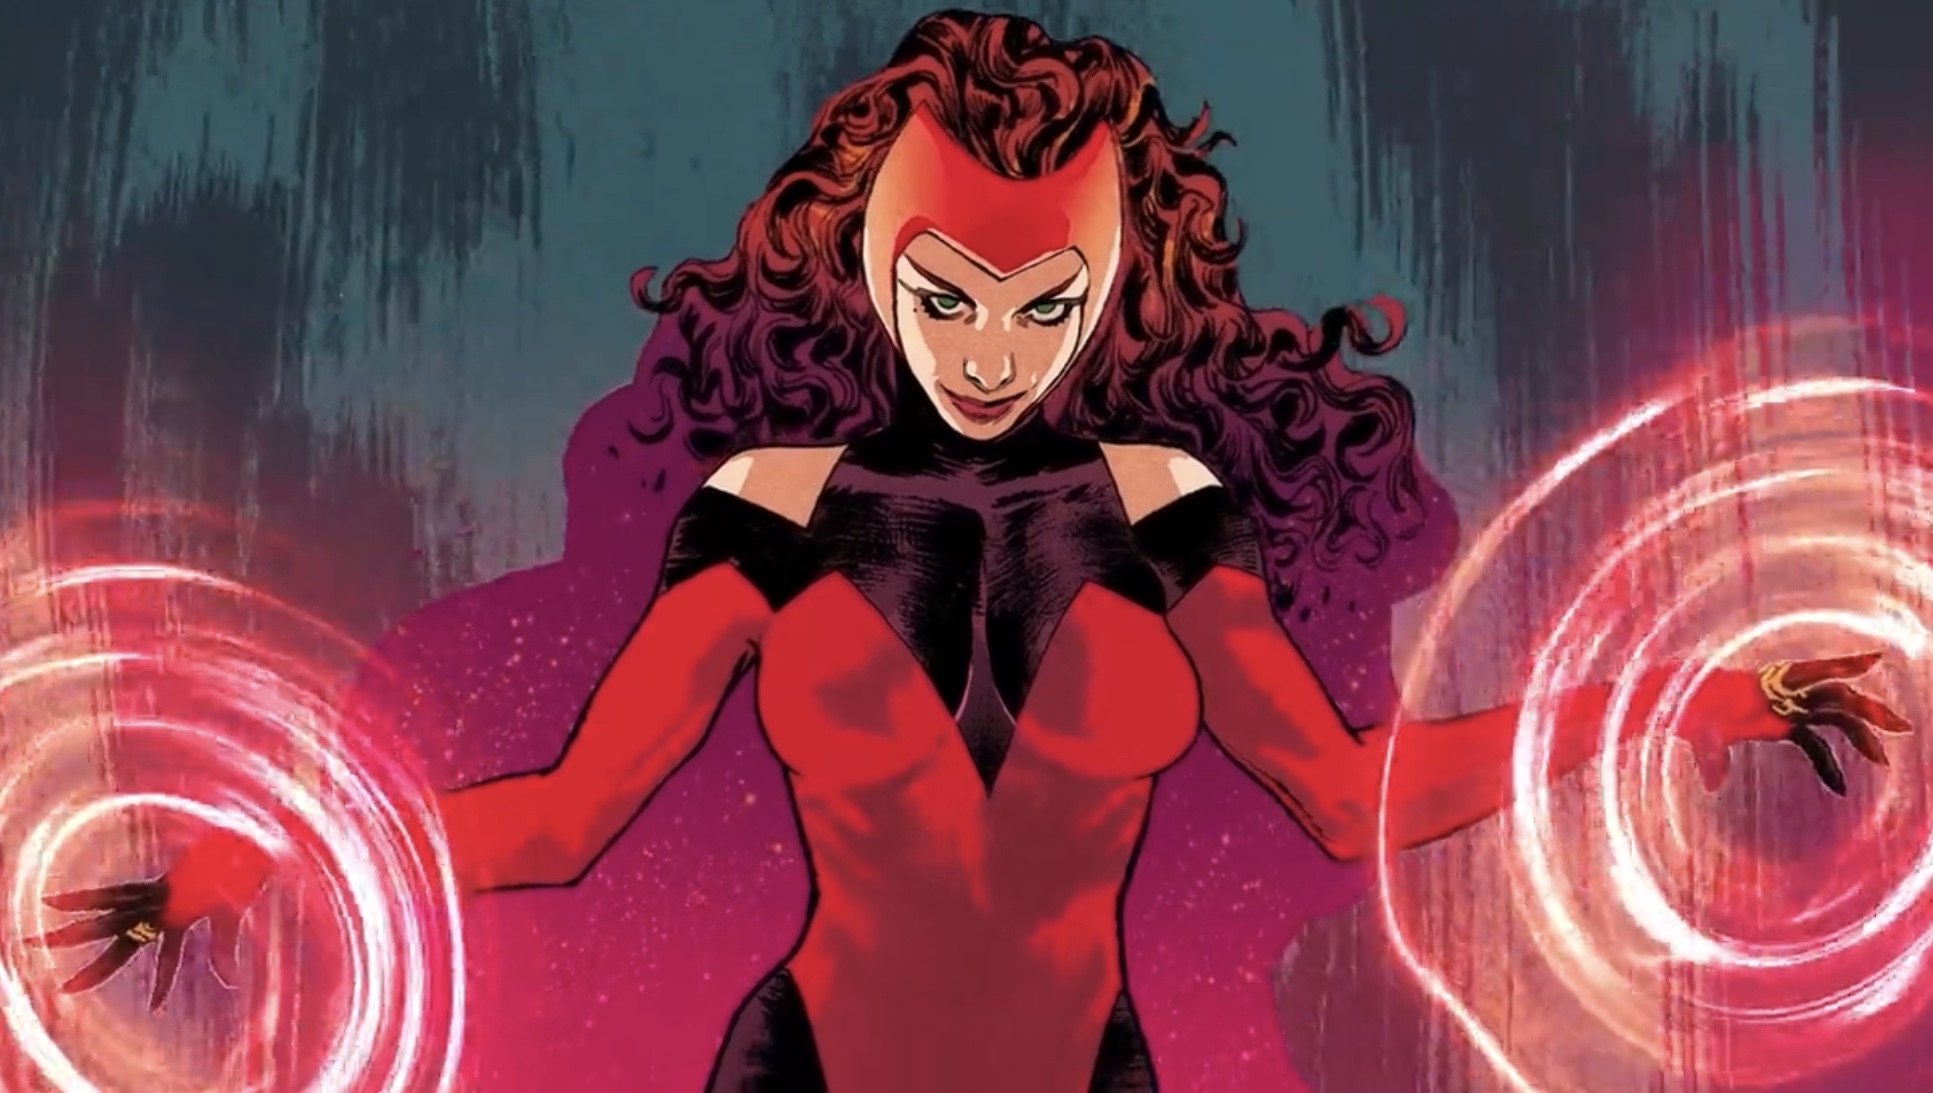 Can scarlet witch beat superman